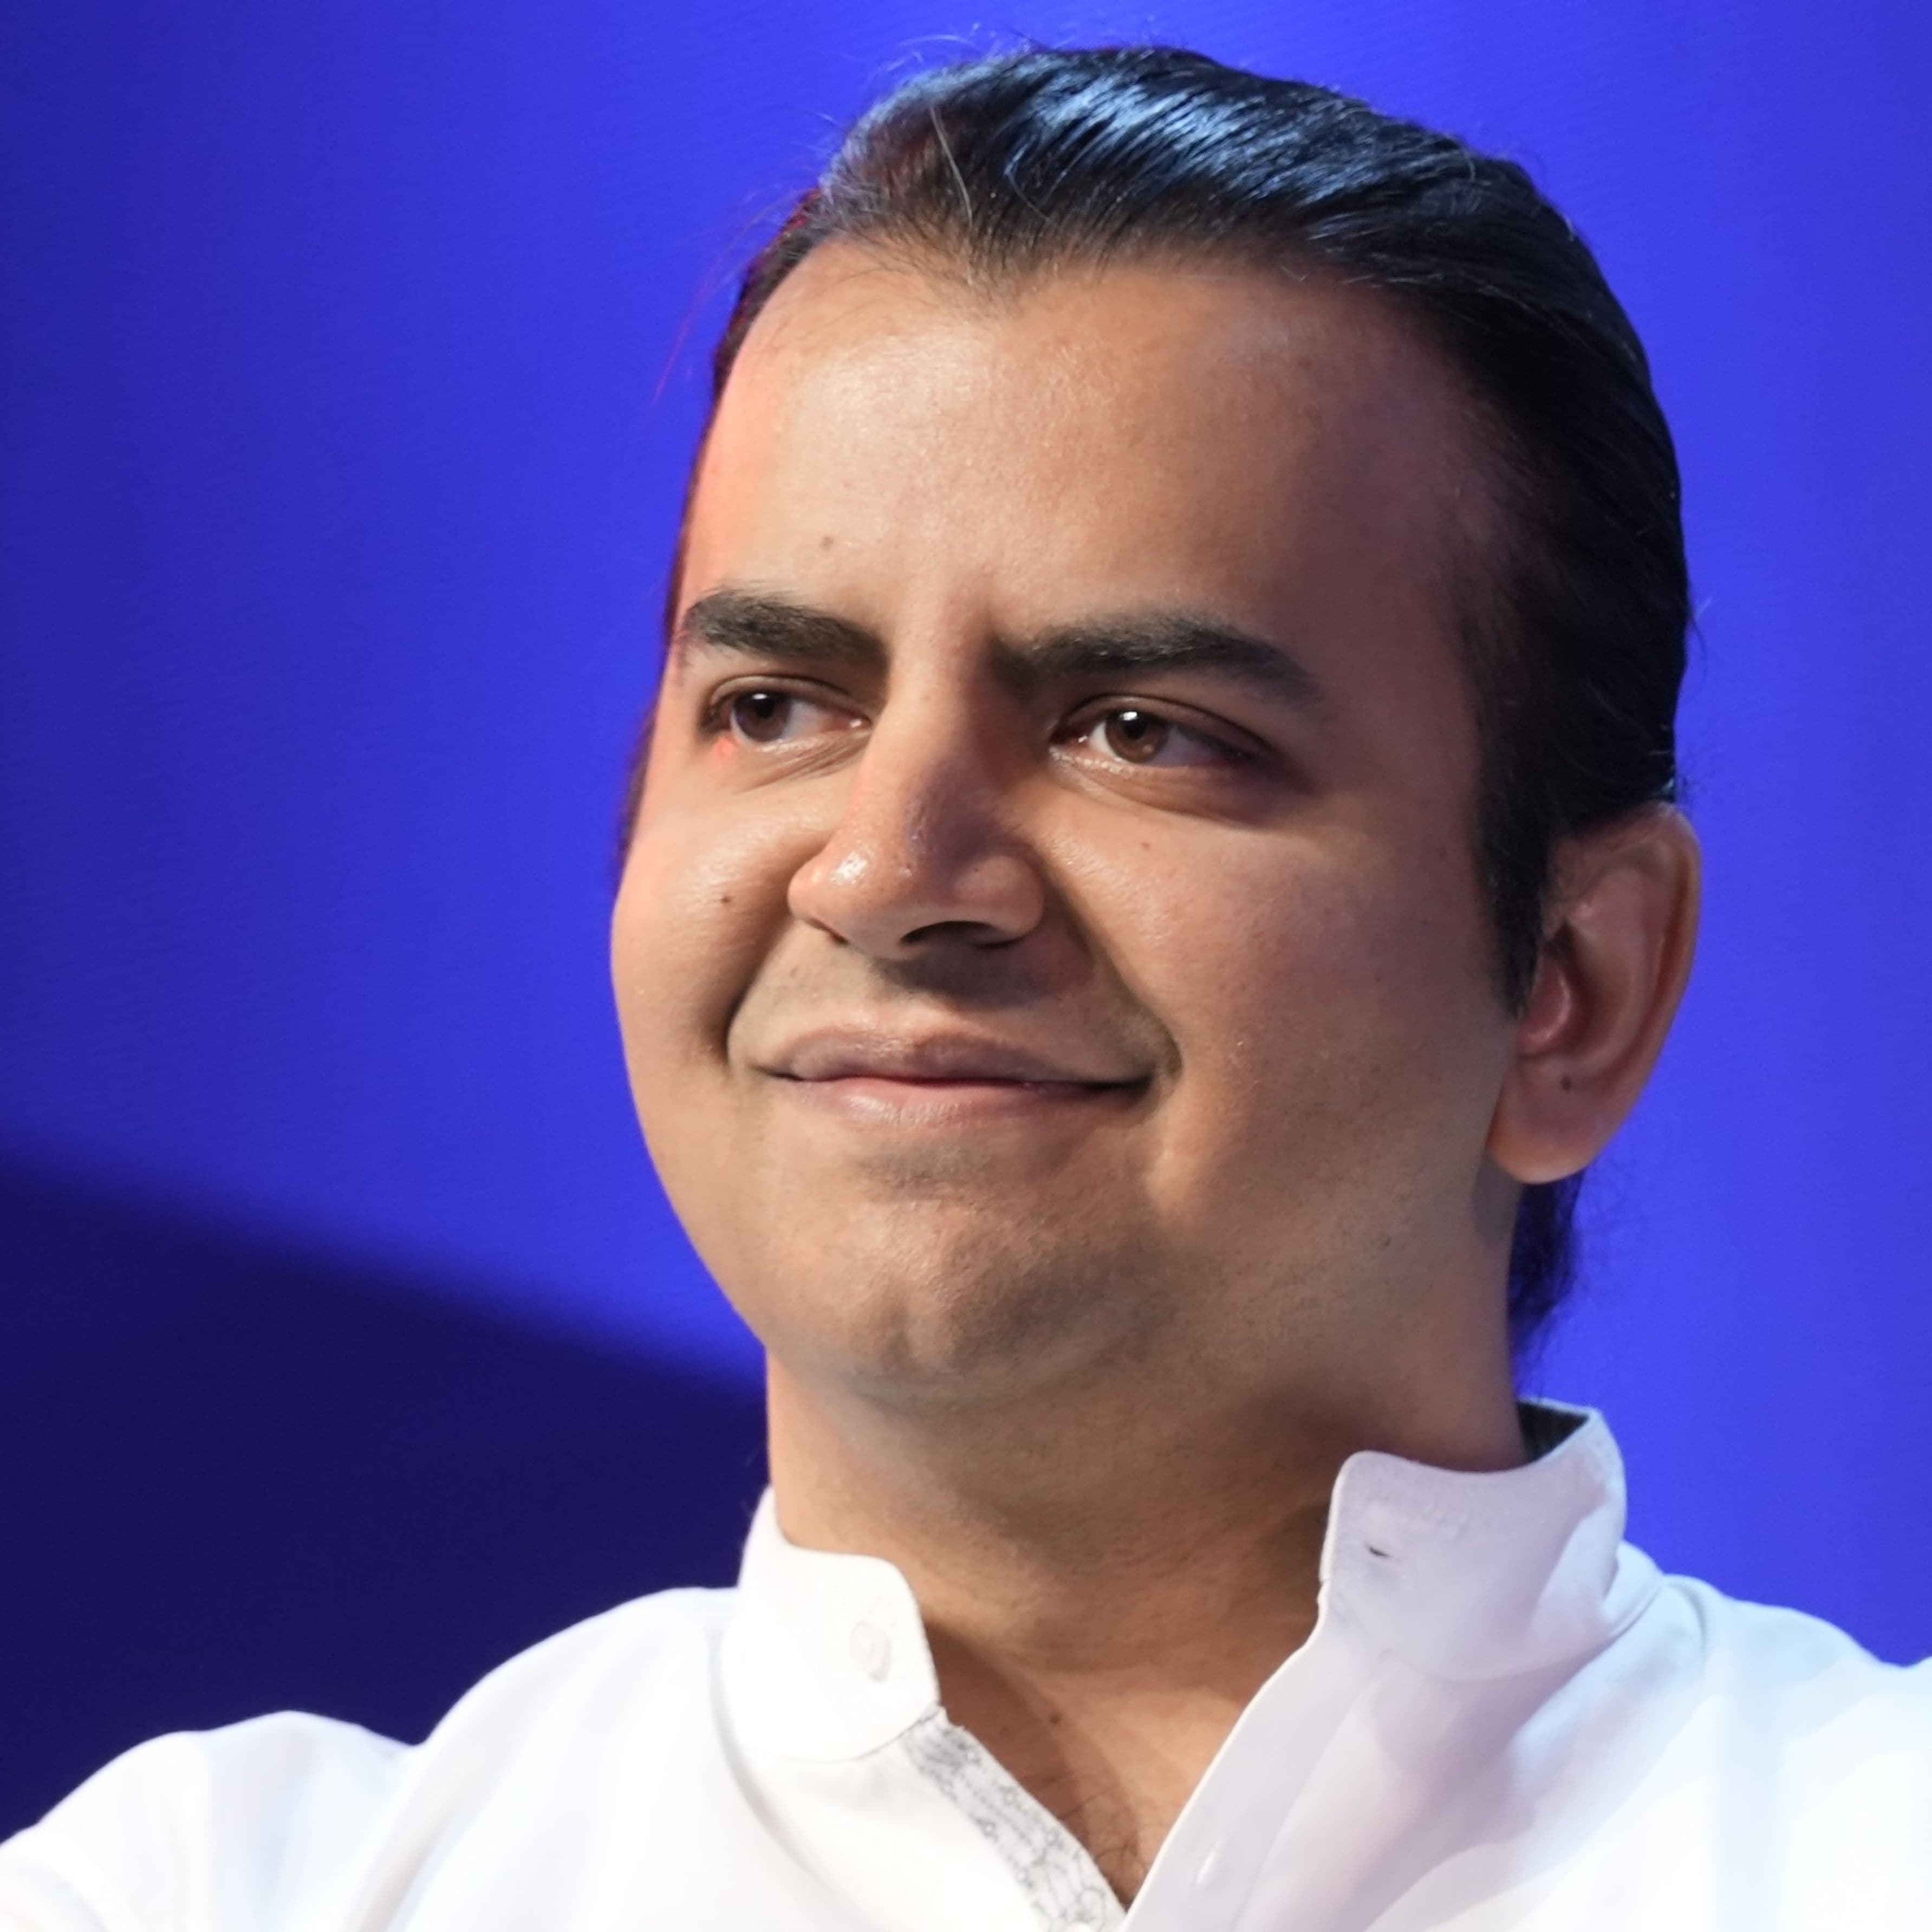 Ola's Bhavish Aggarwal joins issue with OpenAI's Sam Altman; says AI costs can be brought down 